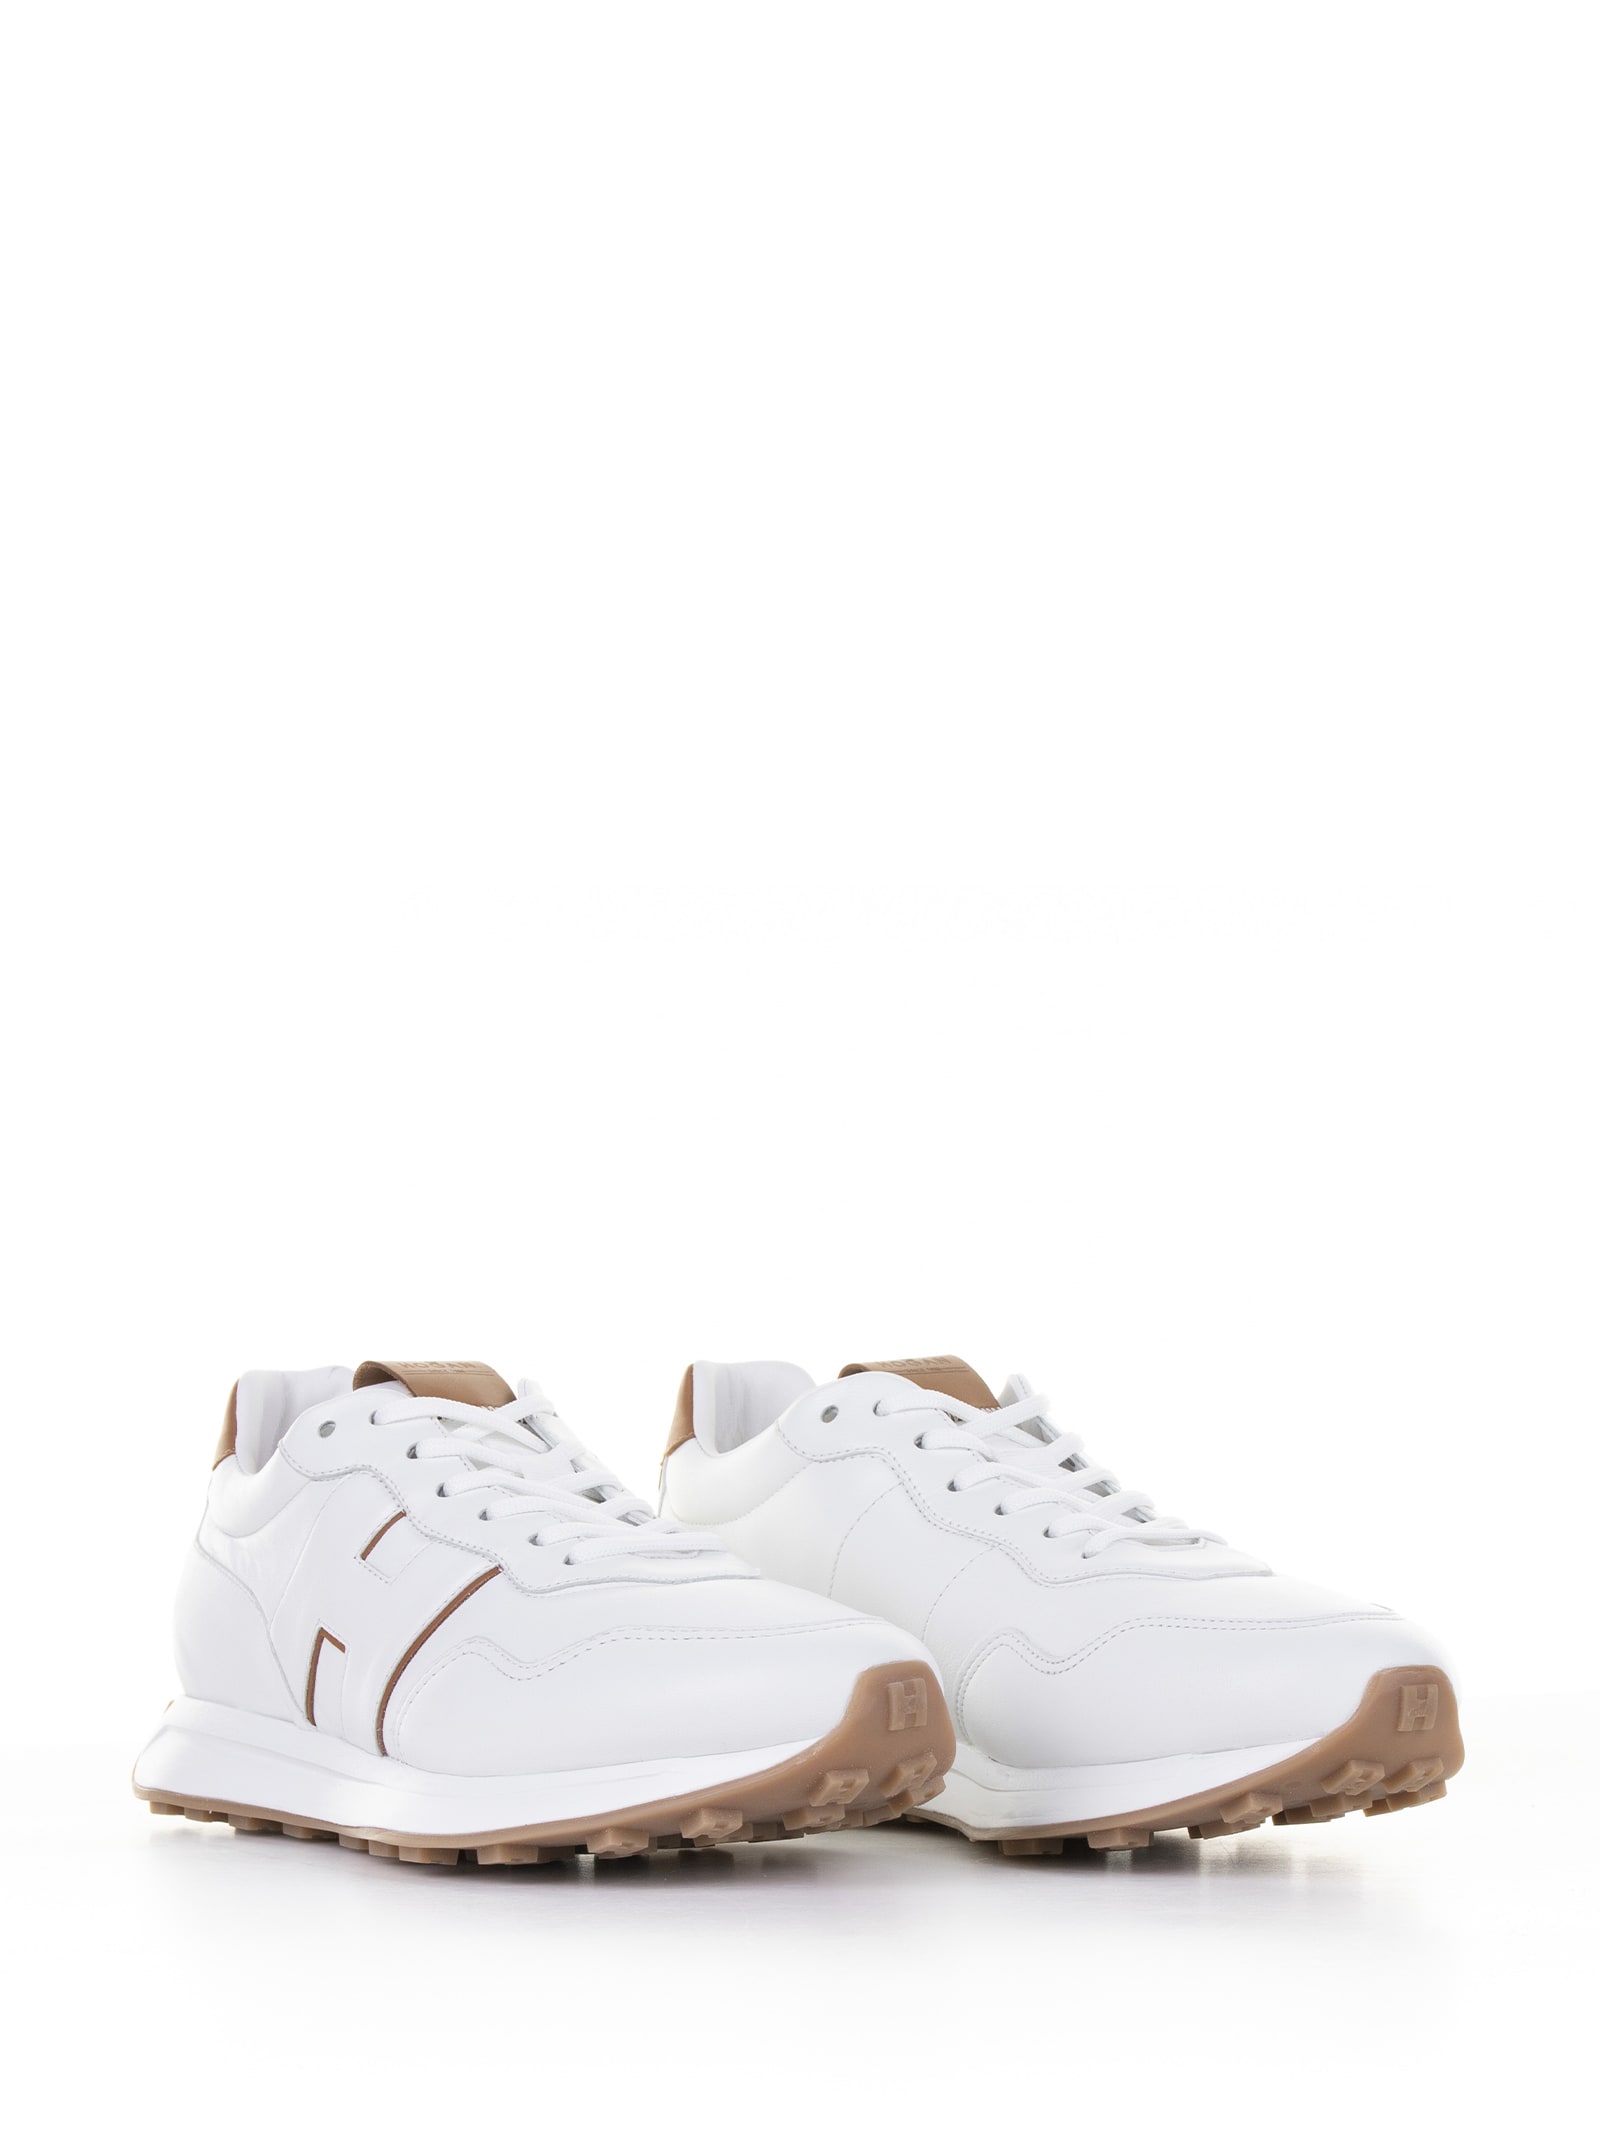 Shop Hogan H601 Leather Sneakers